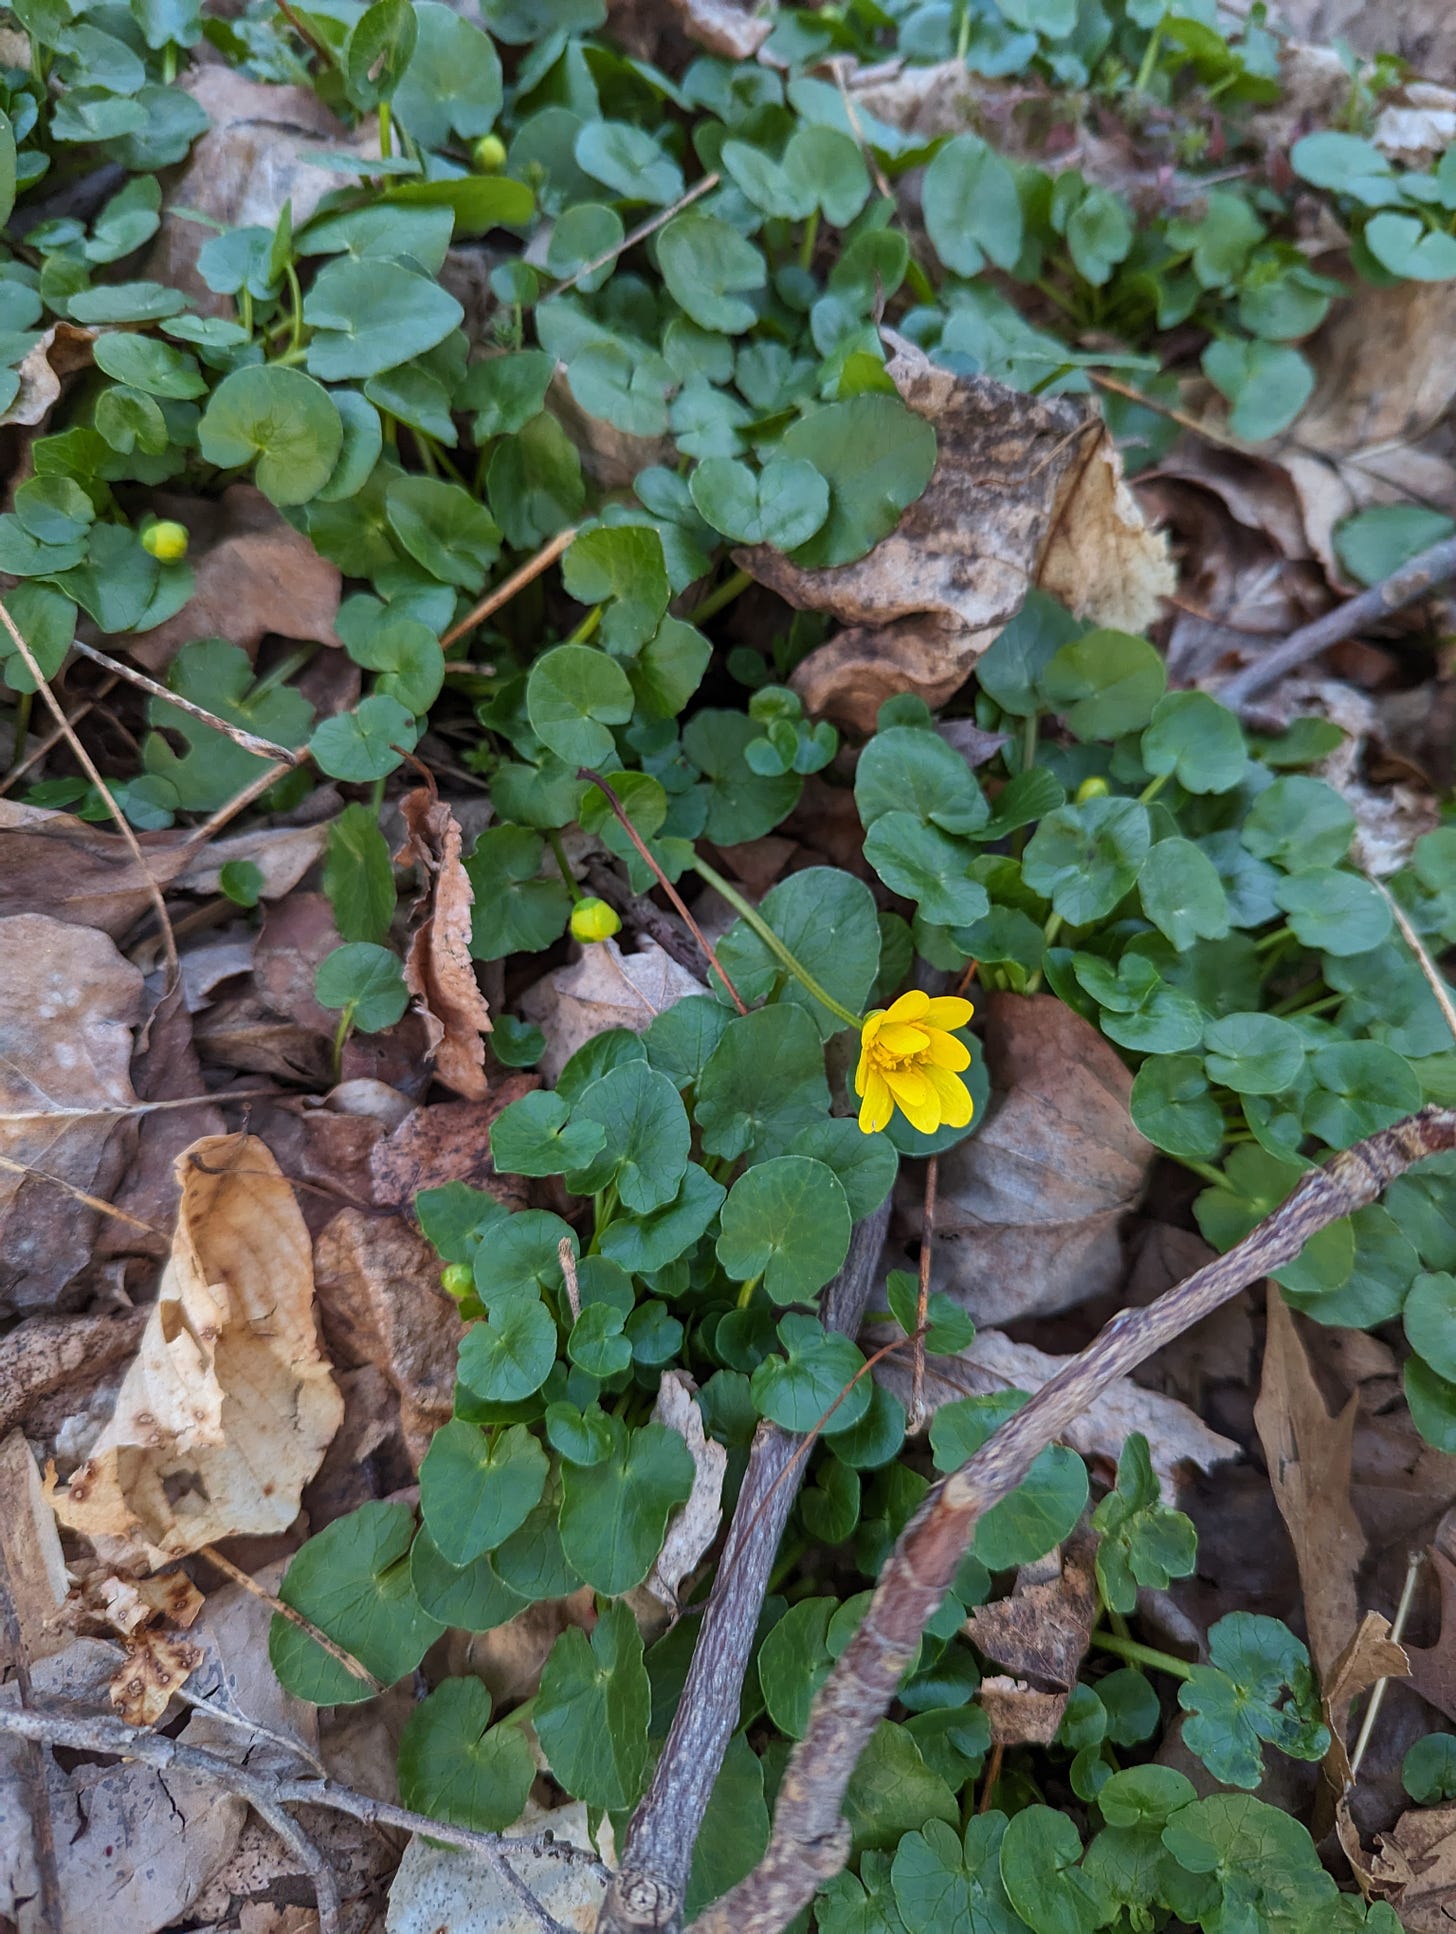 Yellow flower in a mat of small leaves with some dry leaf litter